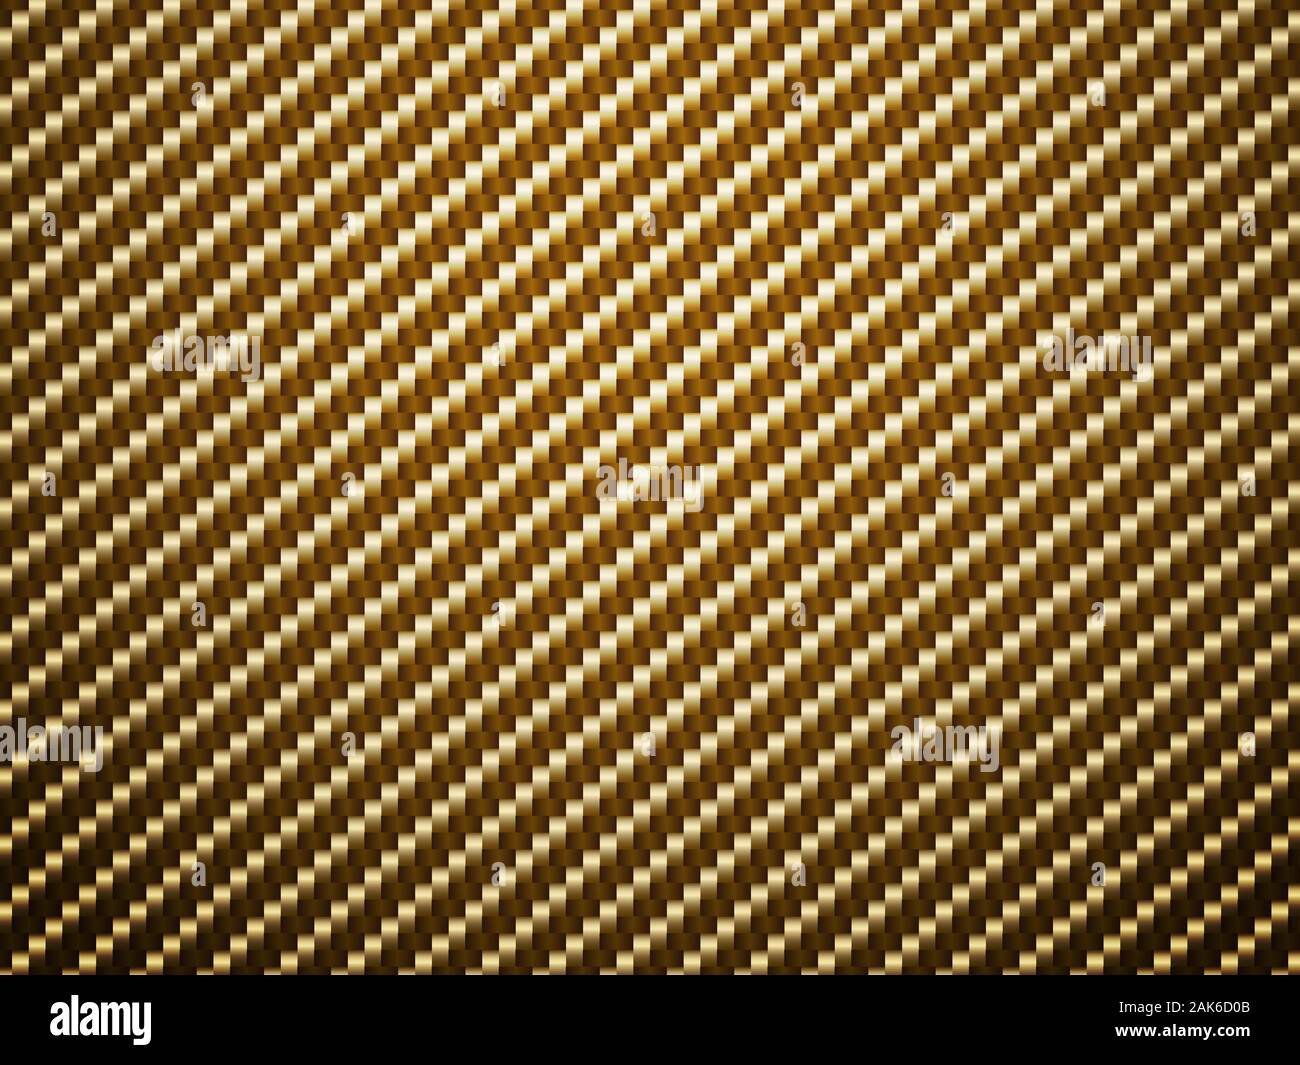 Vector Golden Carbon Fiber Volume Background Abstract Decoration Cloth Material Wallpaper With Shadow For Car Tuning Or Service Stock Vector Image Art Alamy